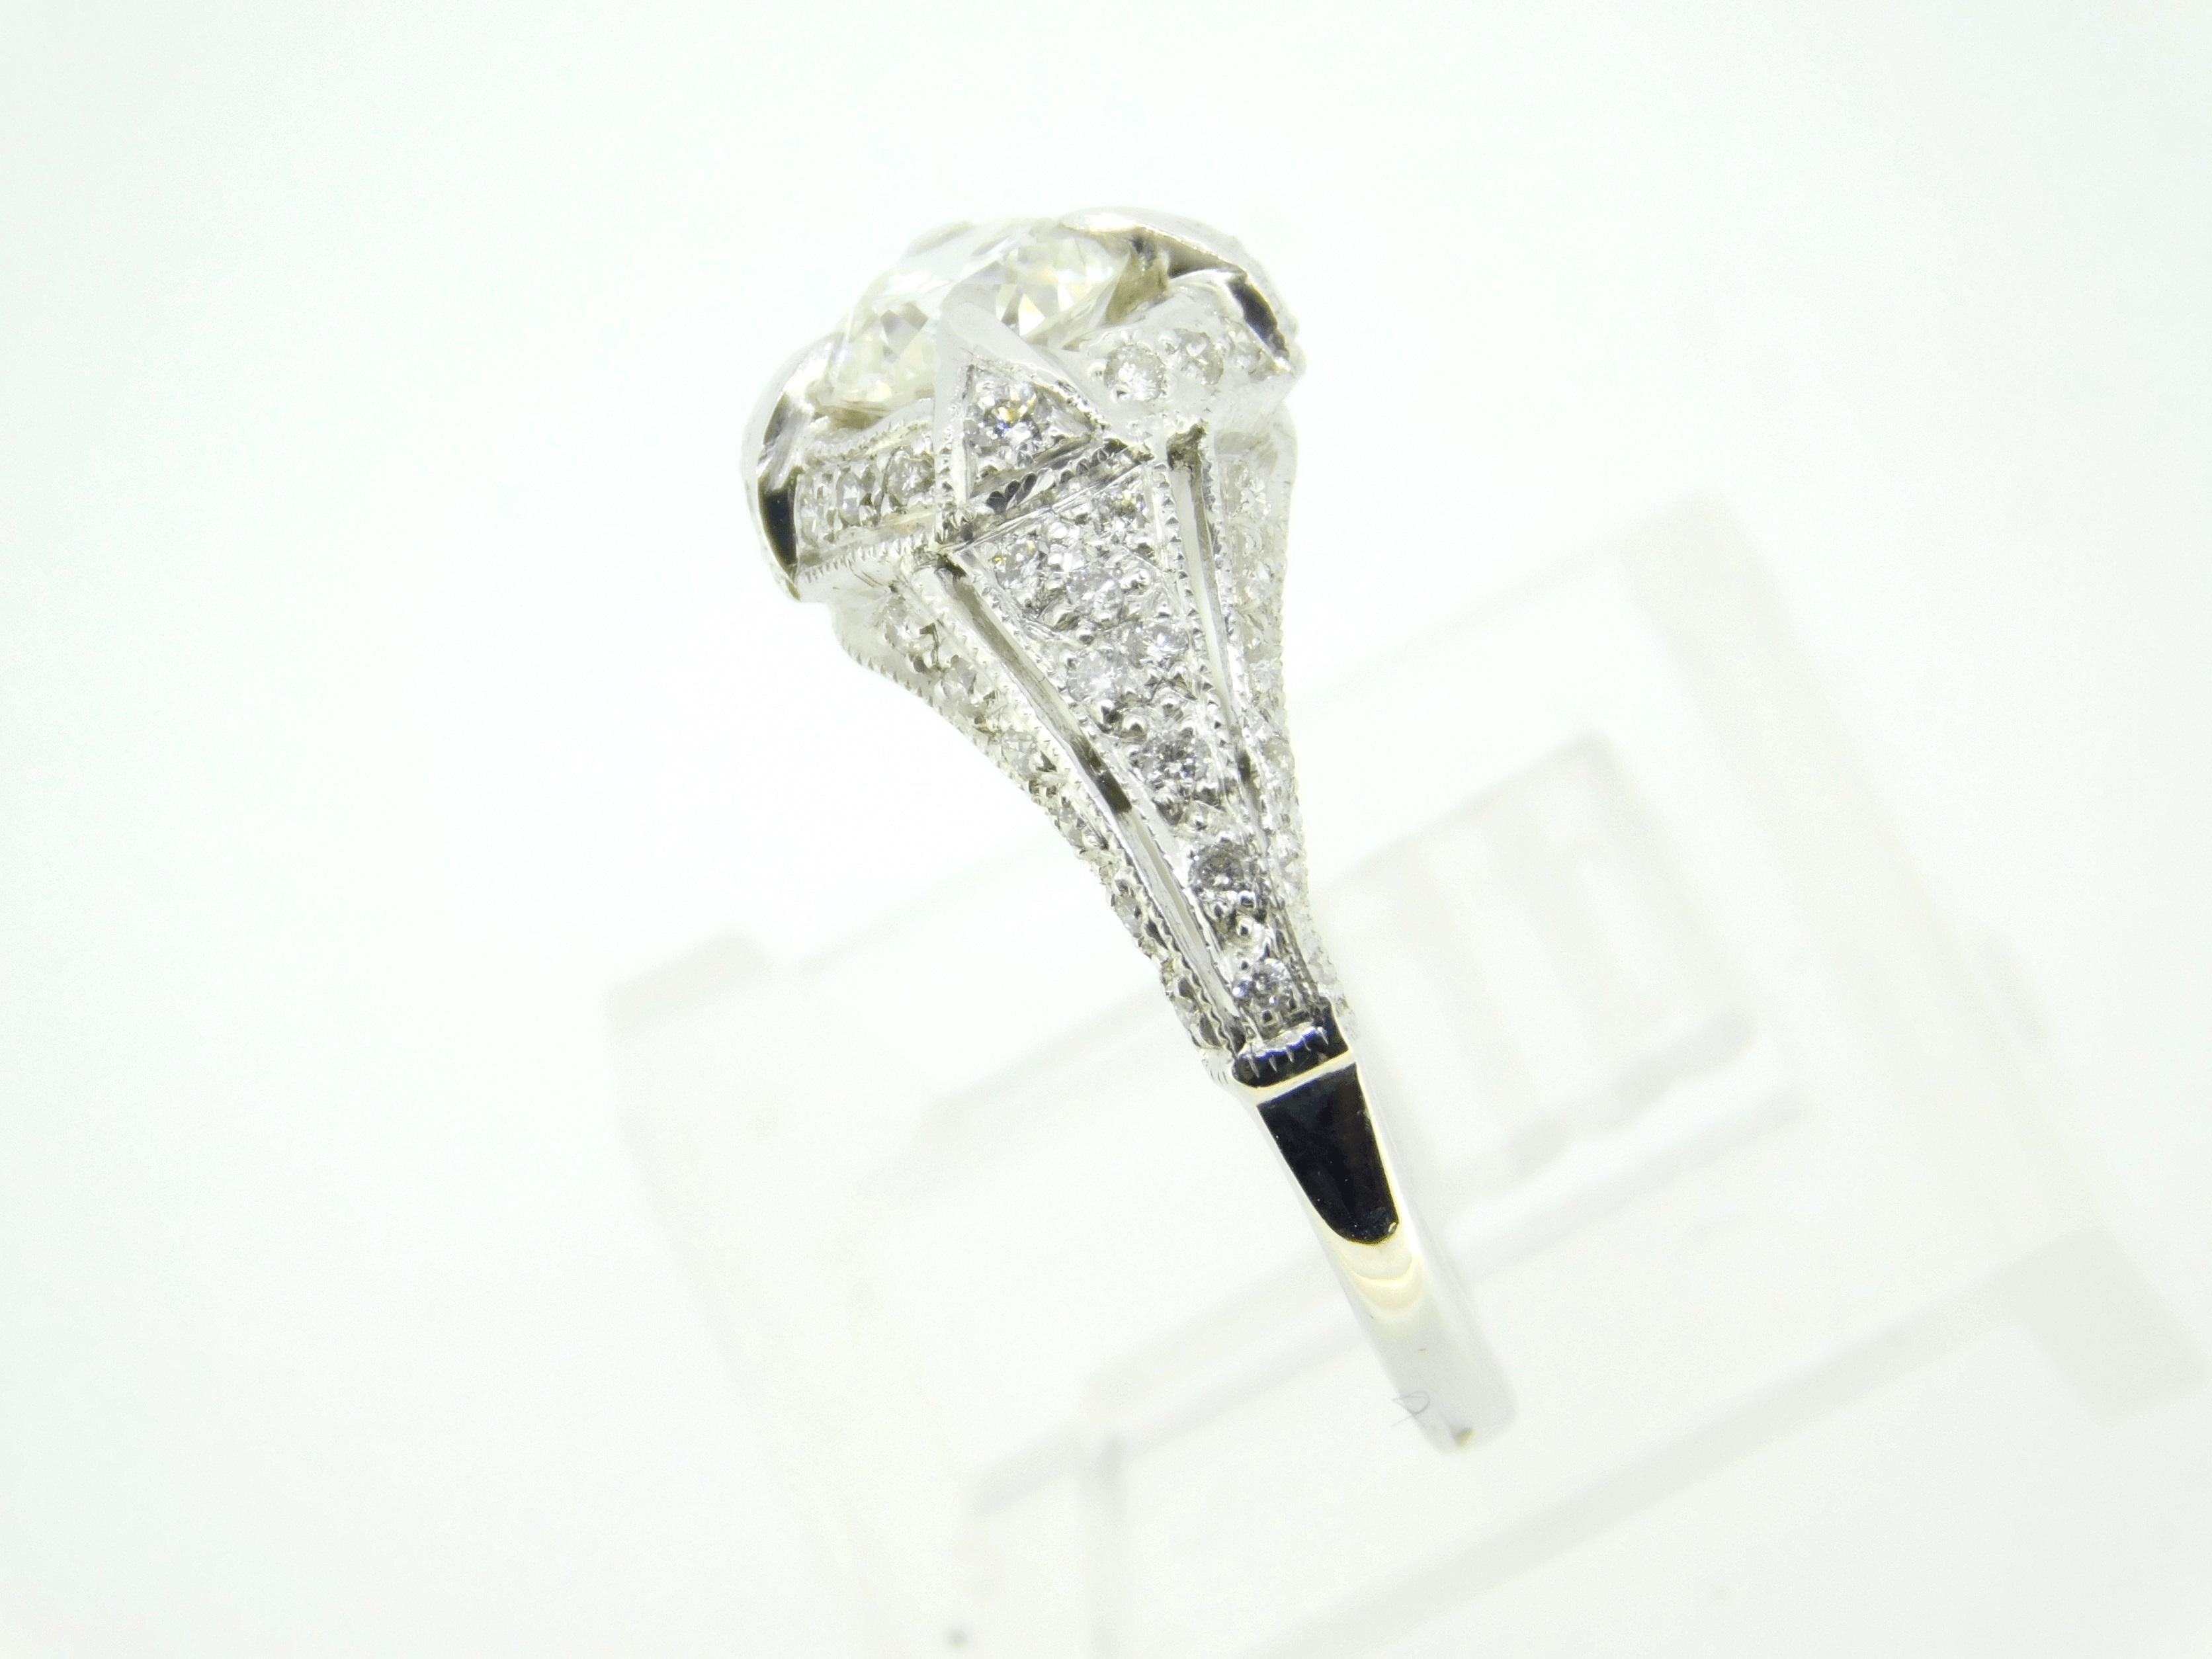 Art Deco 18K white gold 1.05 carat total weight diamond ring featuring a .67ct round brilliant cut diamond. The diamond measures about 5.5mm. There are about 50 small round accent diamonds weighing a total of .38cts. The side diamonds range from 1mm